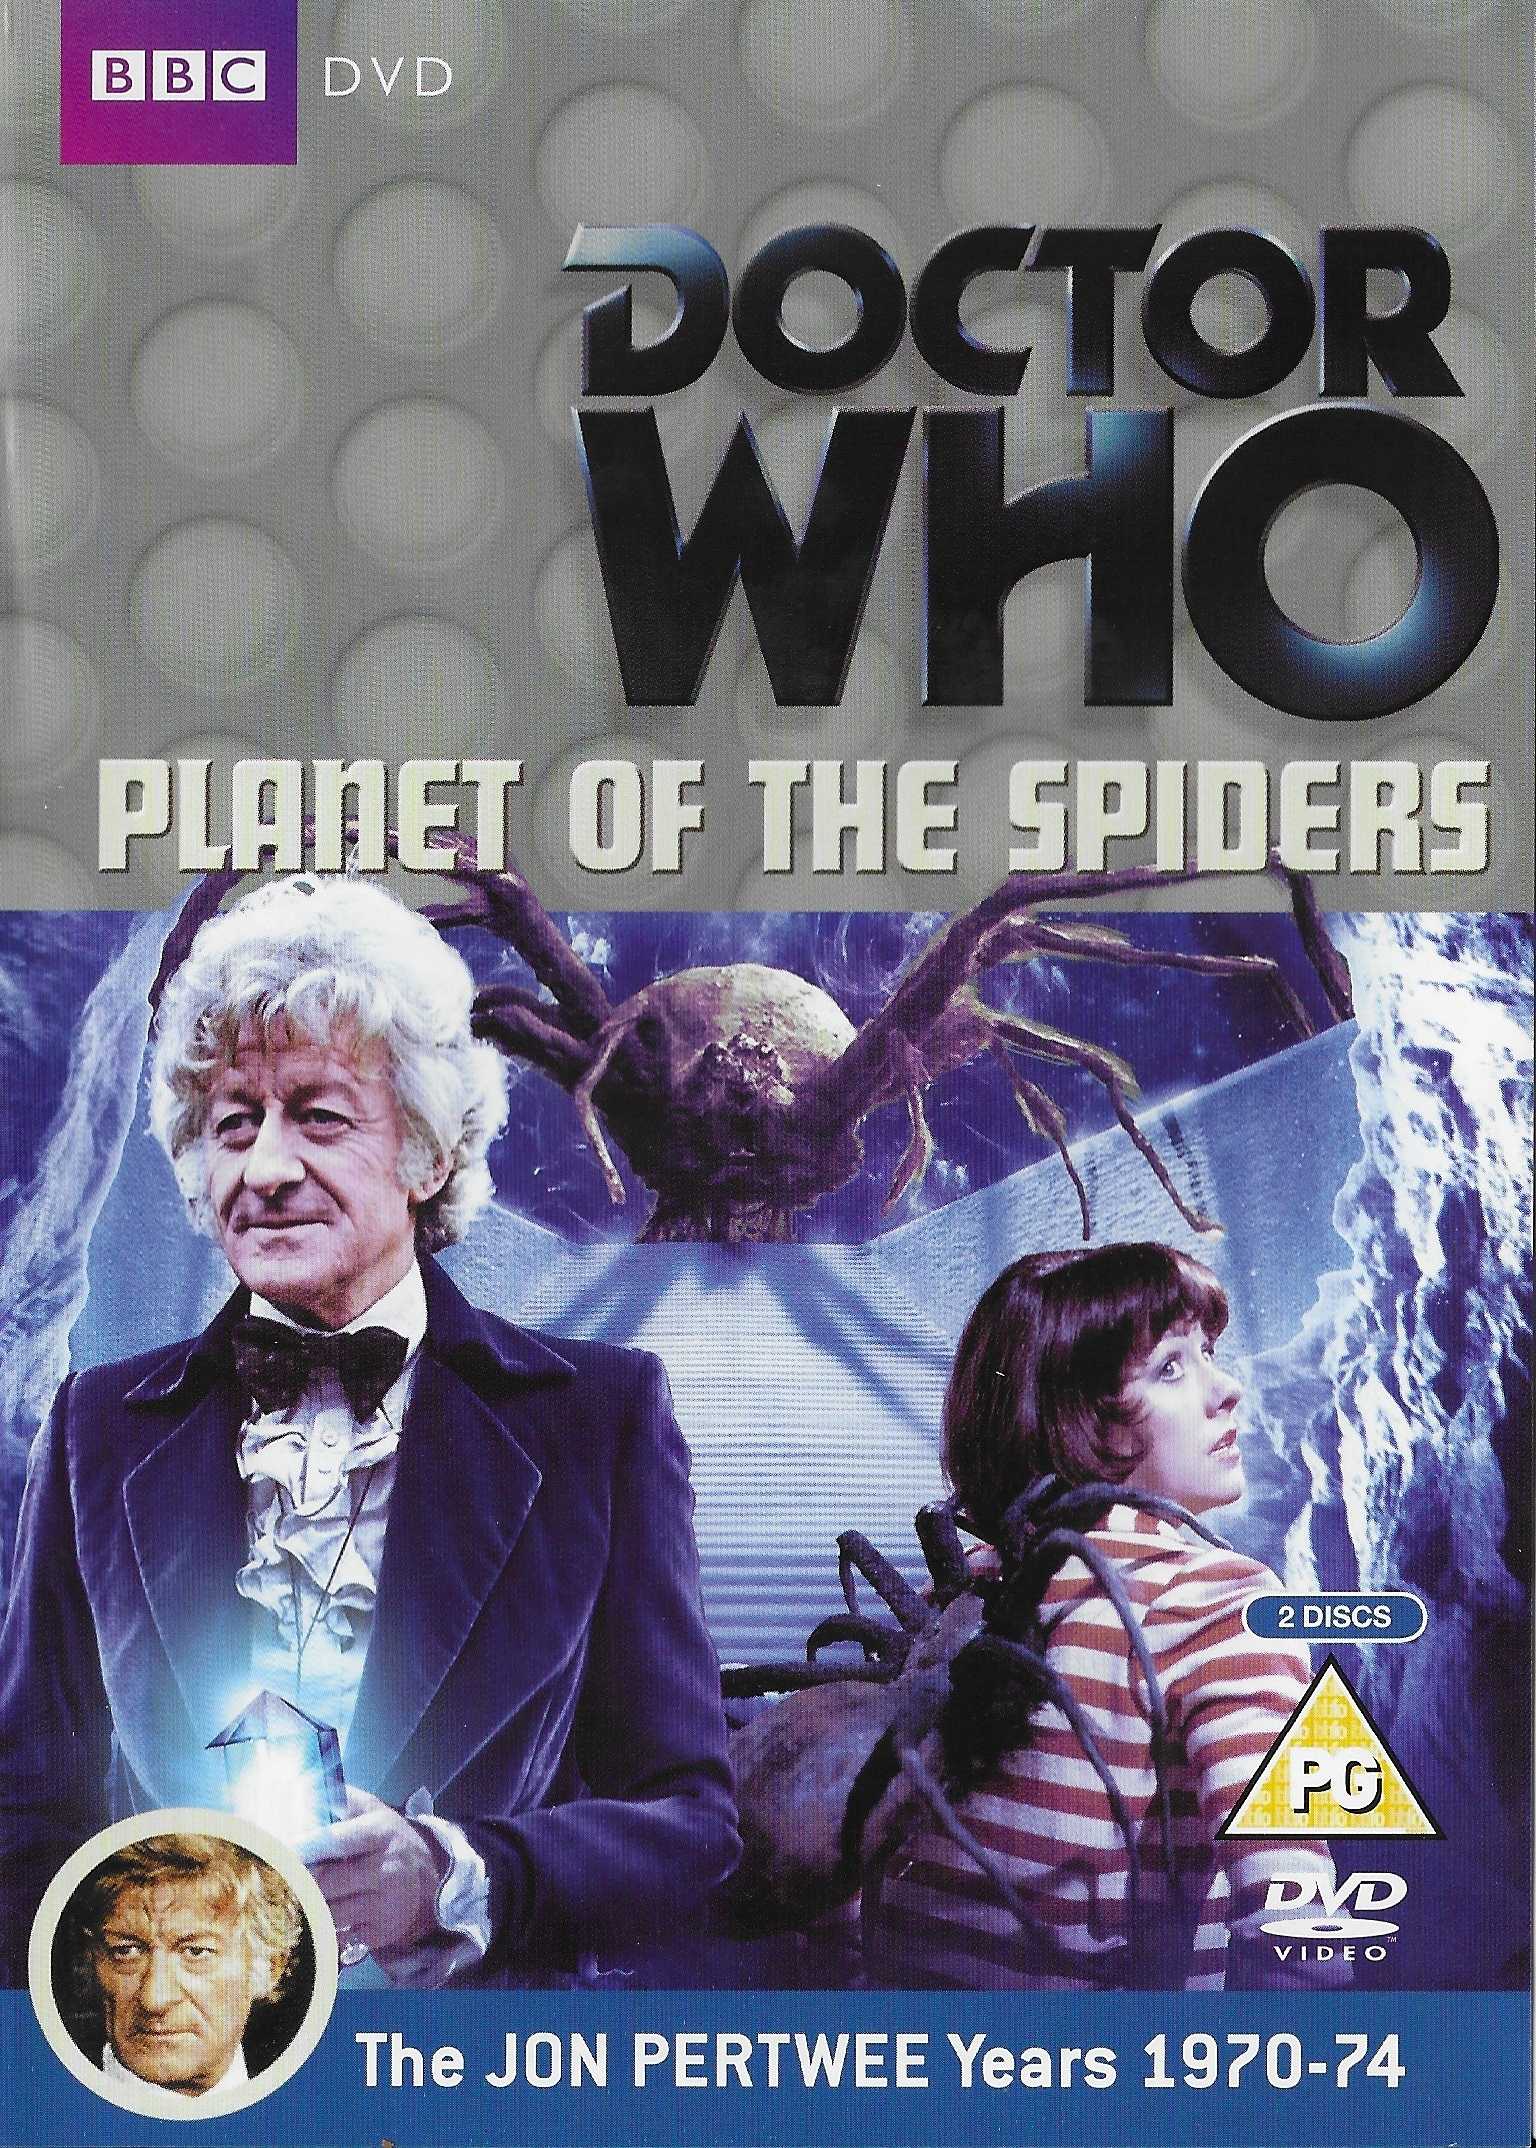 Picture of BBCDVD 1809 Doctor Who - Planet of the spiders by artist Robert Sloman from the BBC records and Tapes library